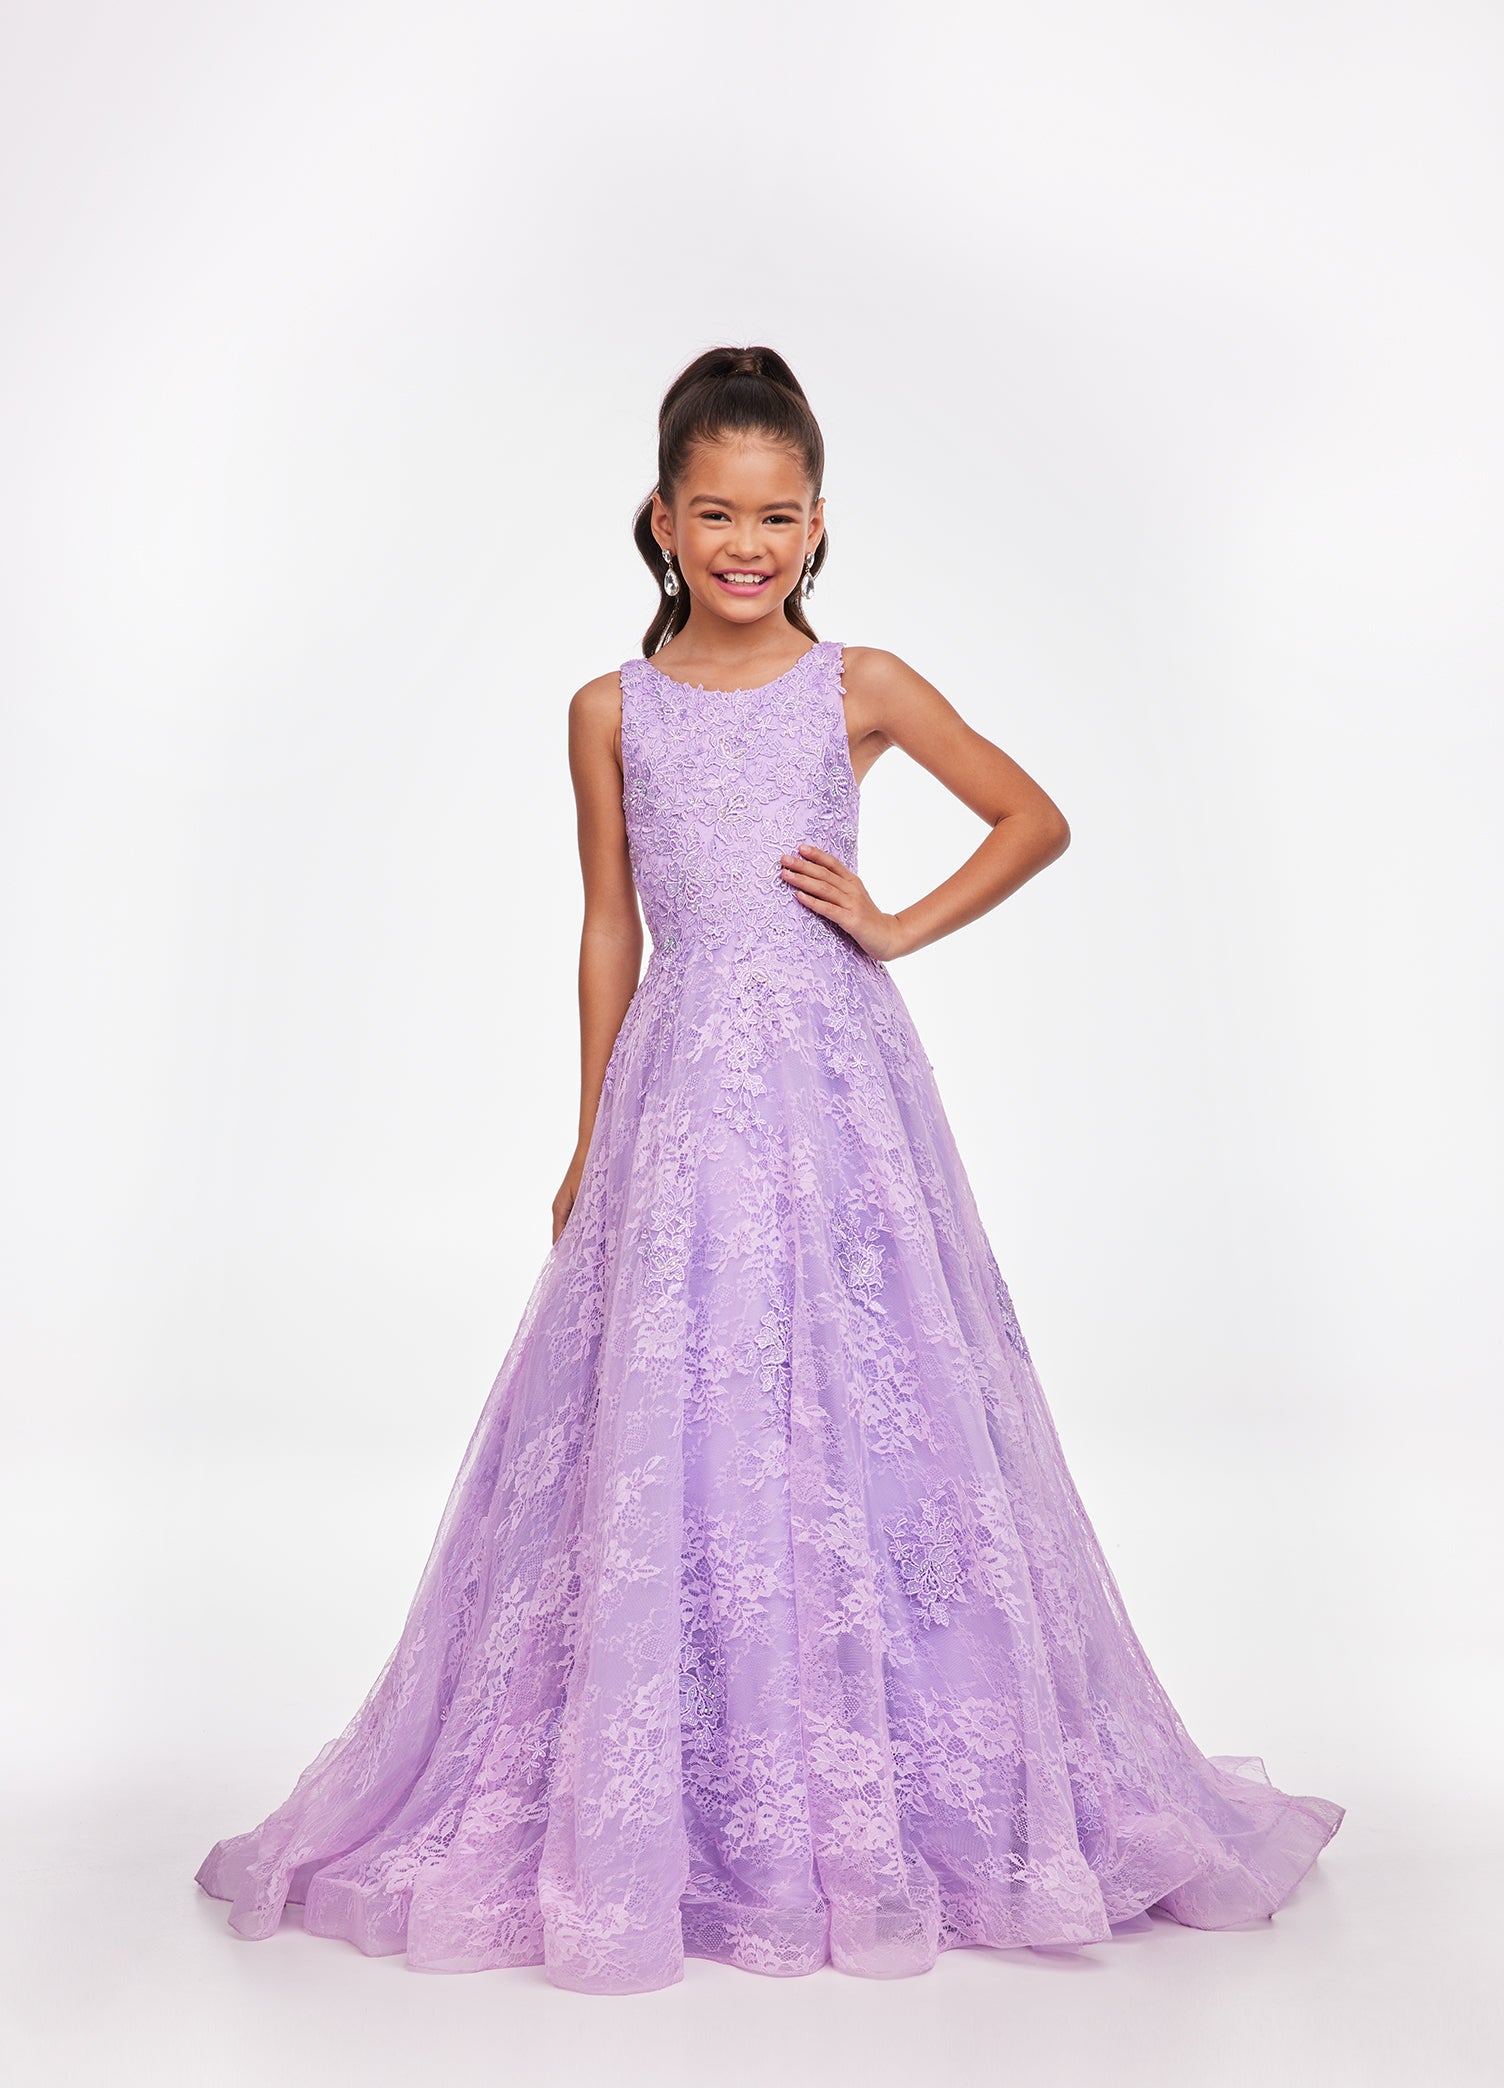 Ashley Lauren Kids 8073 Girls Long Lace A Line Ball Gown Pageant Dress High Neck Lovely lace gown featuring a crew neckline embellished with lace applique and AB stones throughout the bodice and skirt. Crew Neckline Lace Applique A-Line Available Sizes: 4-16 Available Colors: Aqua, Lilac